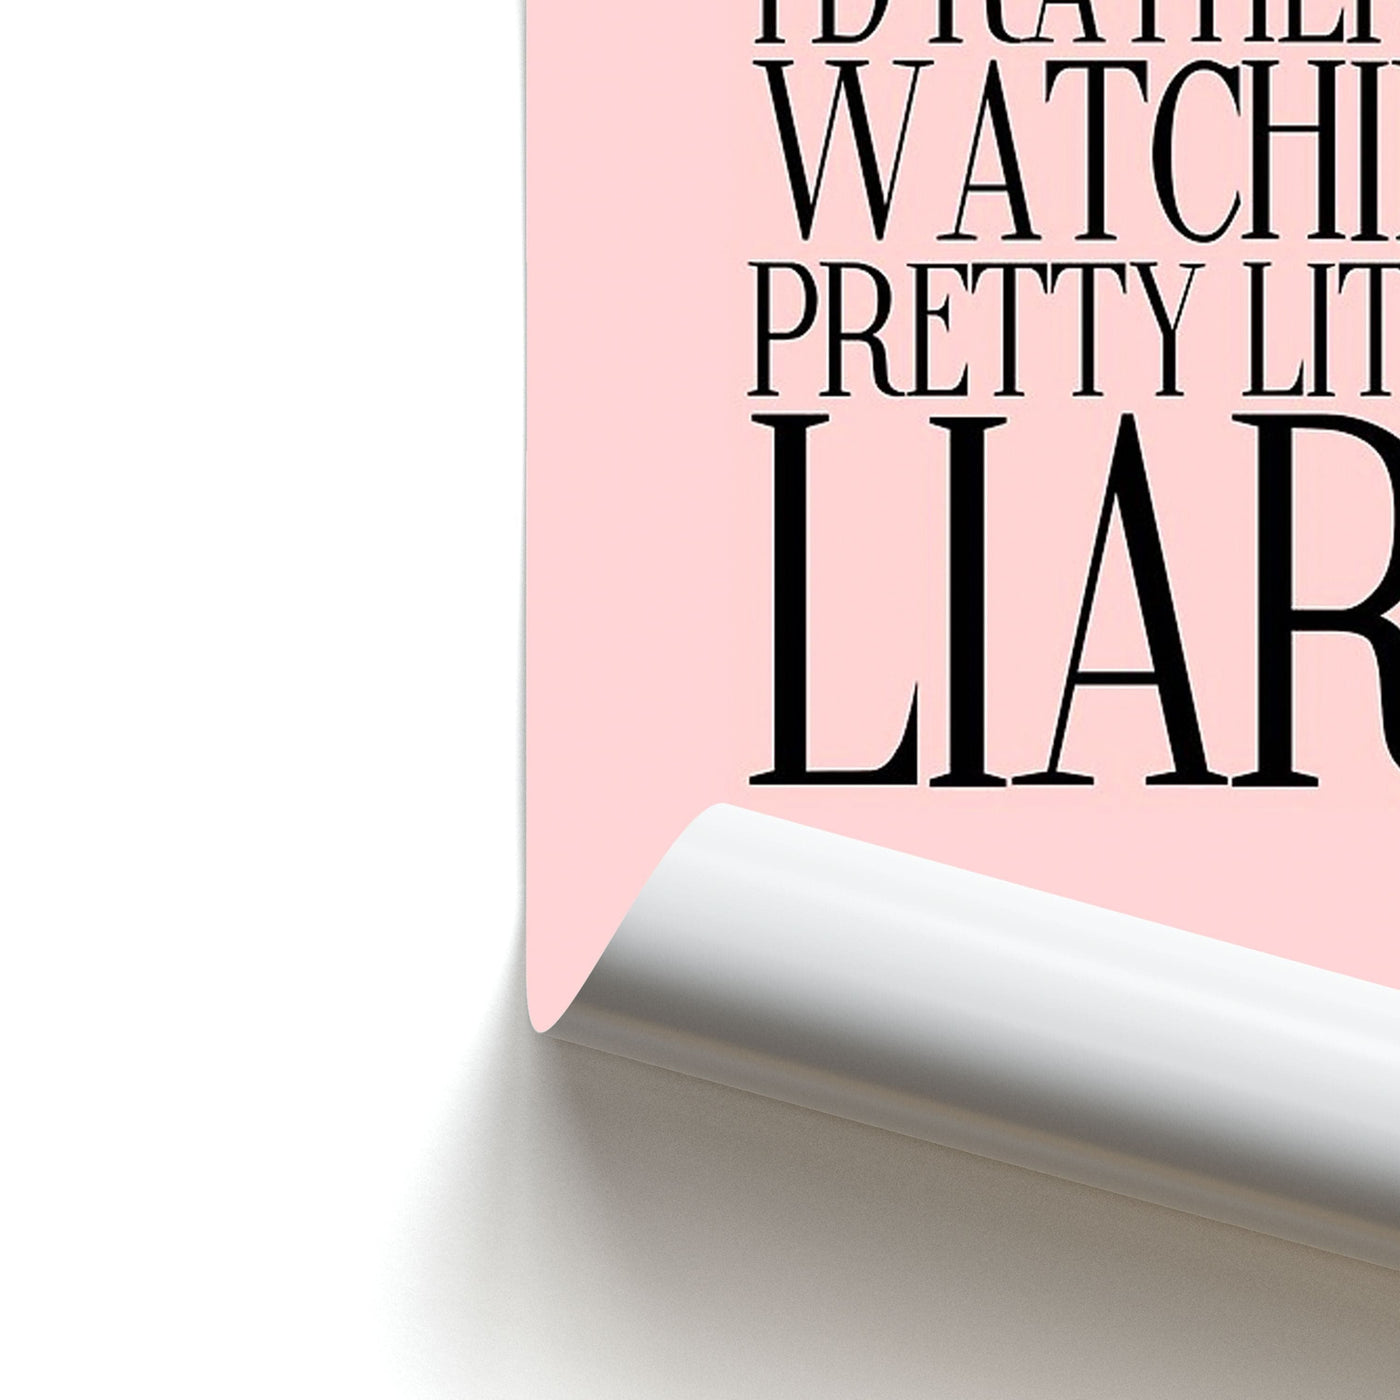 Rather Be Watching Pretty Little Liars... Poster